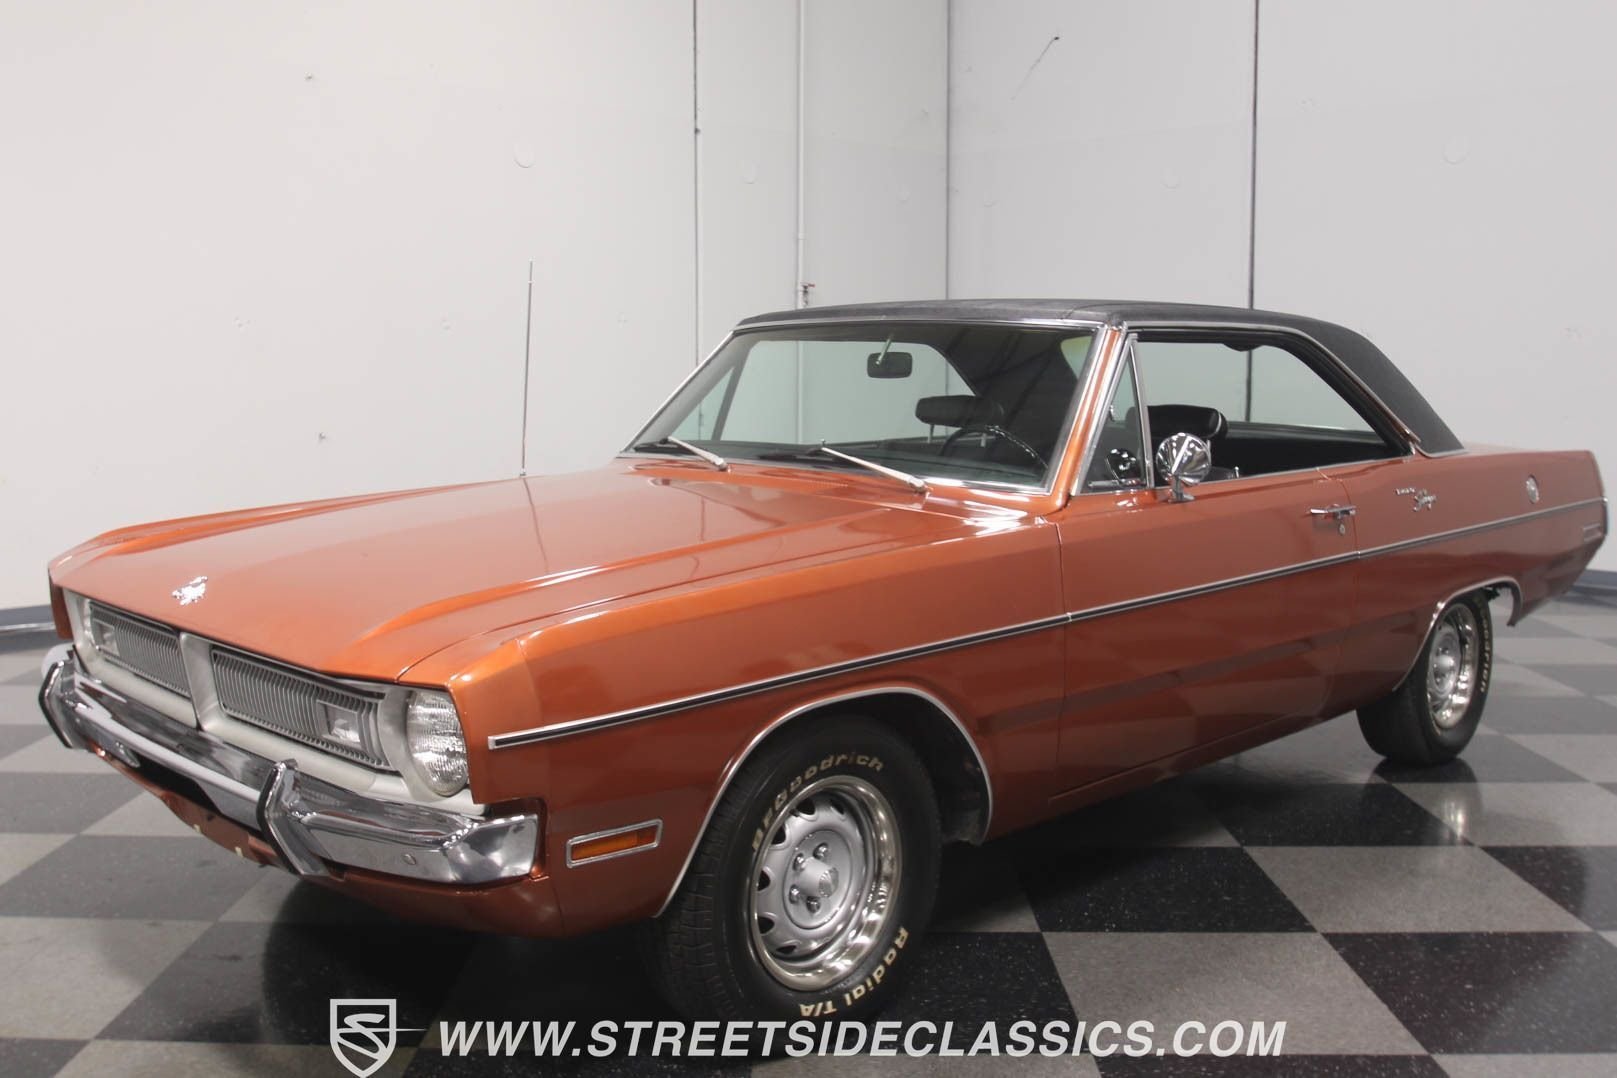 1970 Dodge Dart Classic Cars for Sale picture